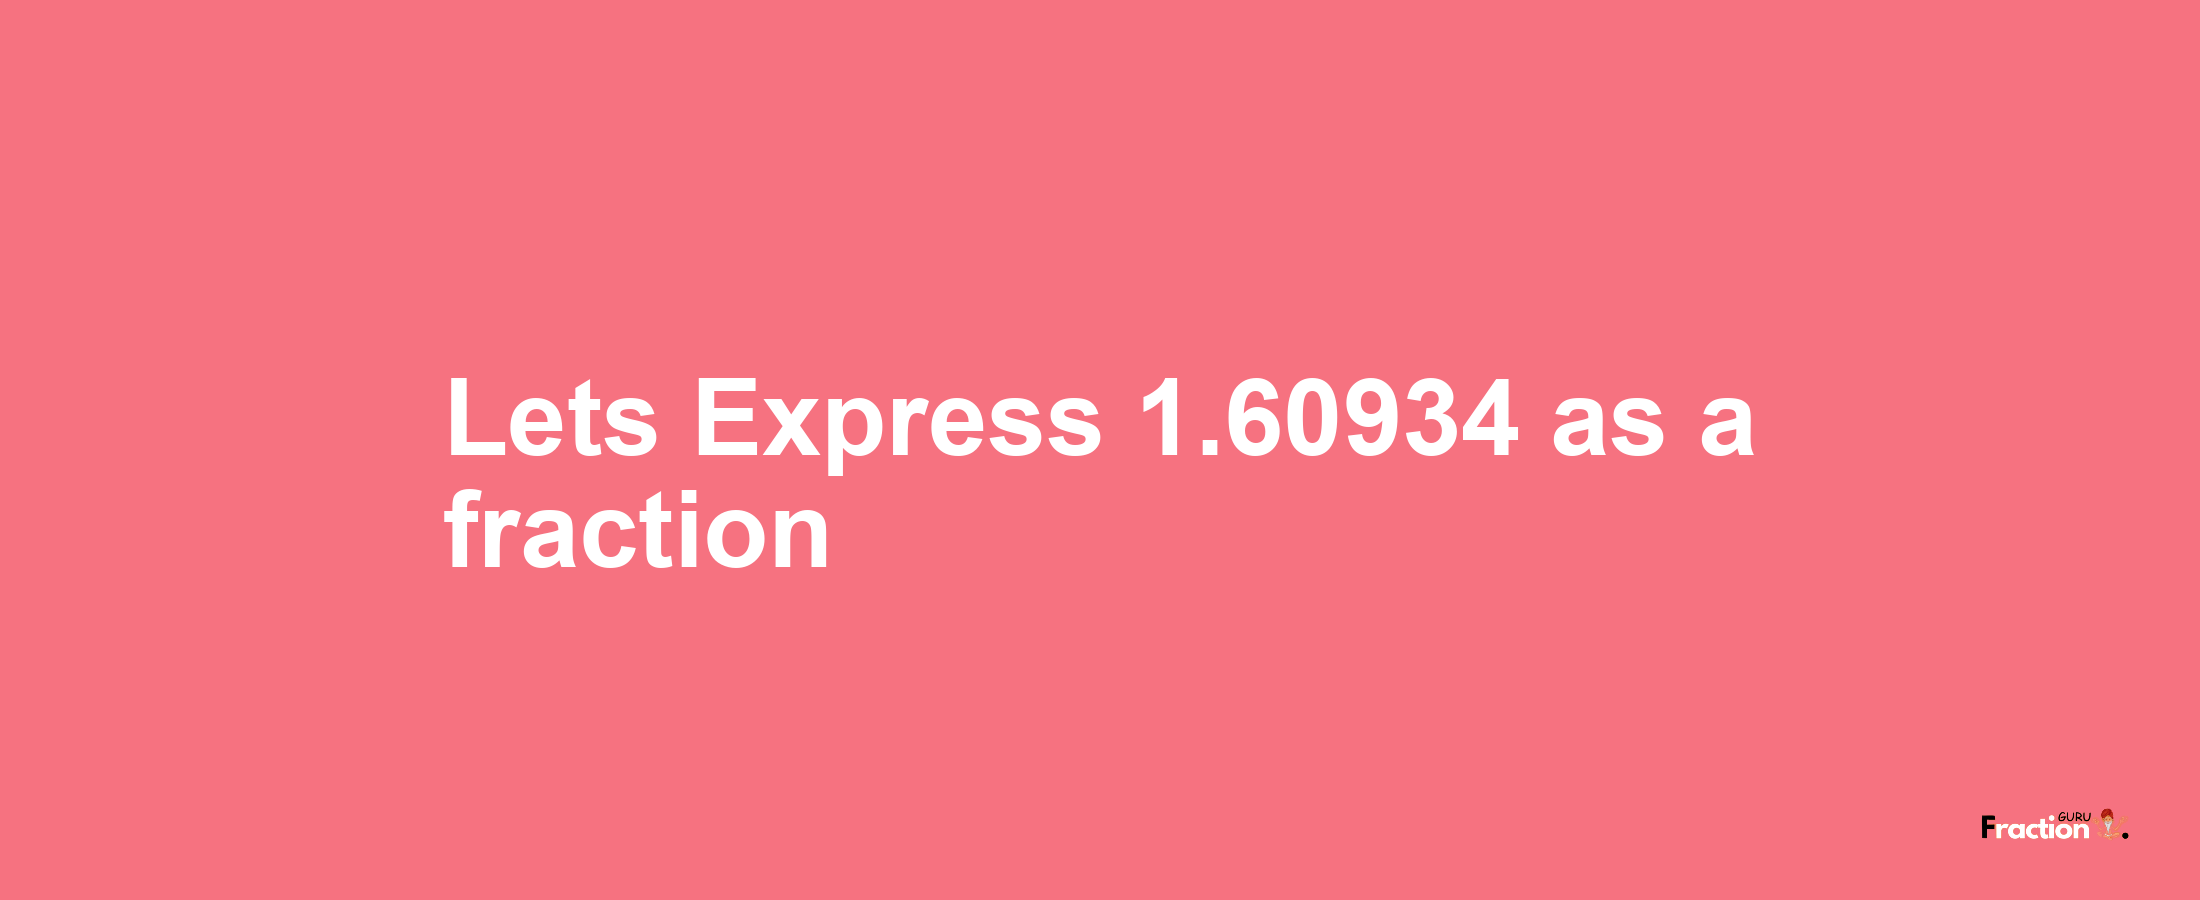 Lets Express 1.60934 as afraction